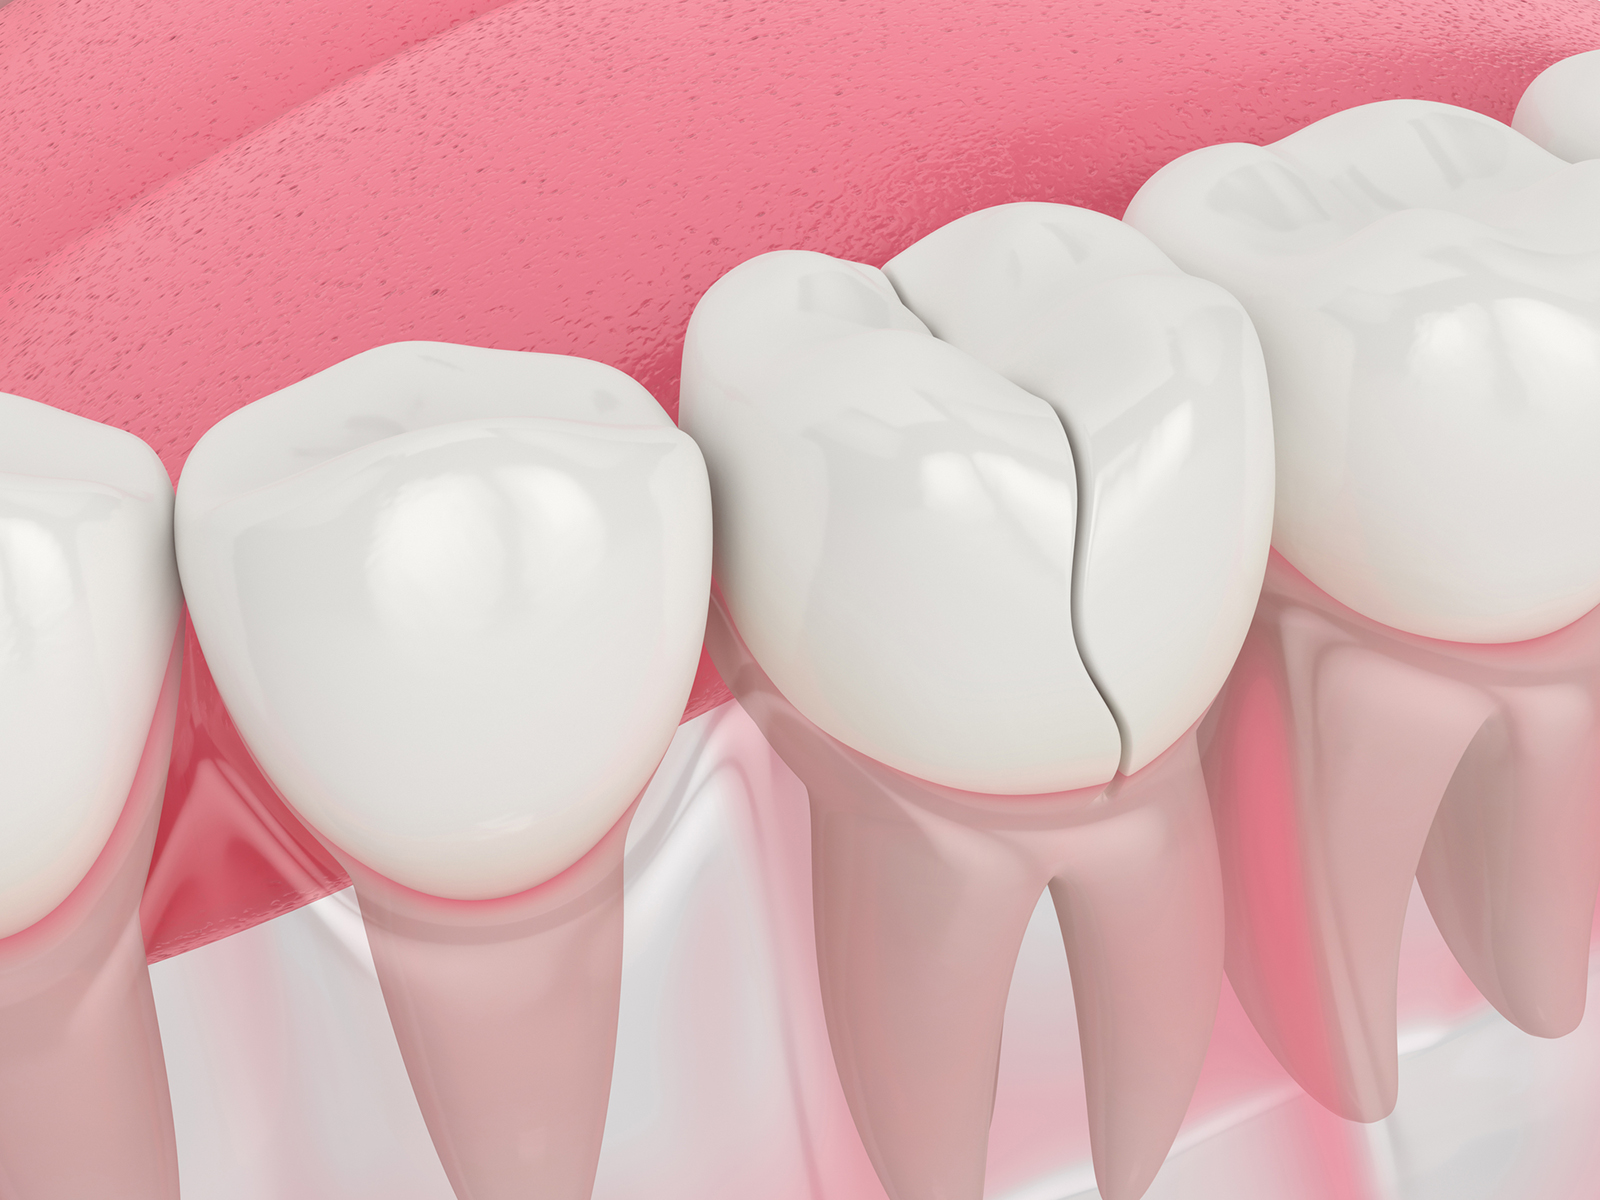 Endodontic Therapy To Save A Cracked Tooth